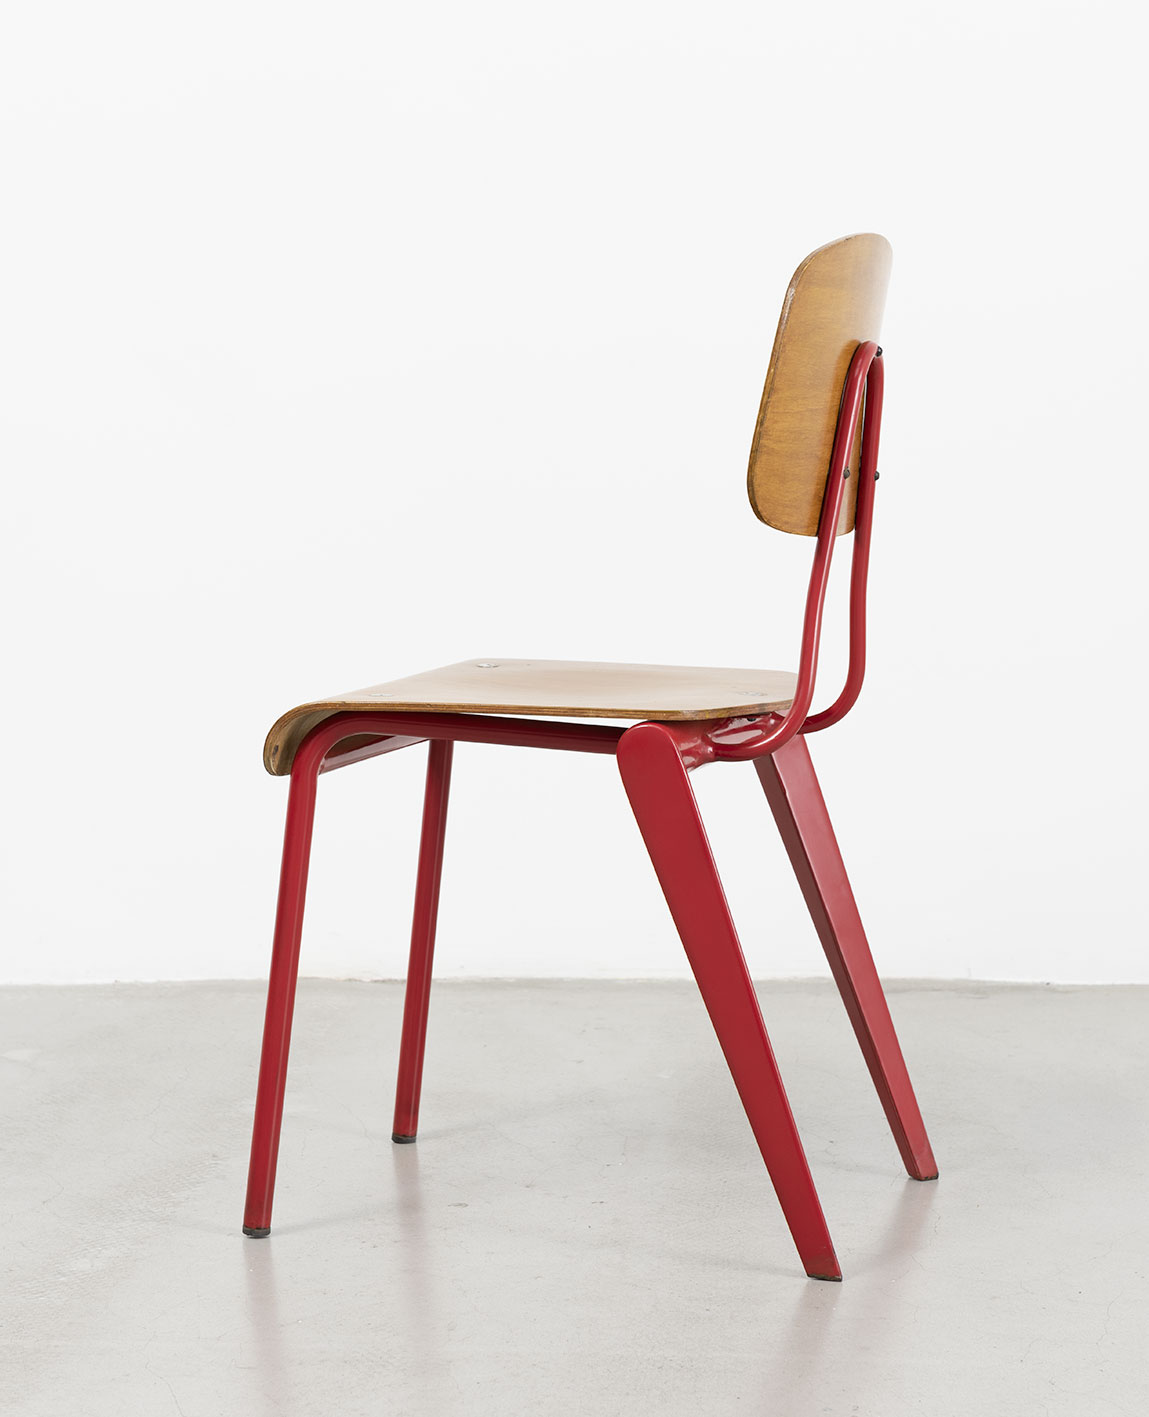 Scolaire chair no. 806, 1951.